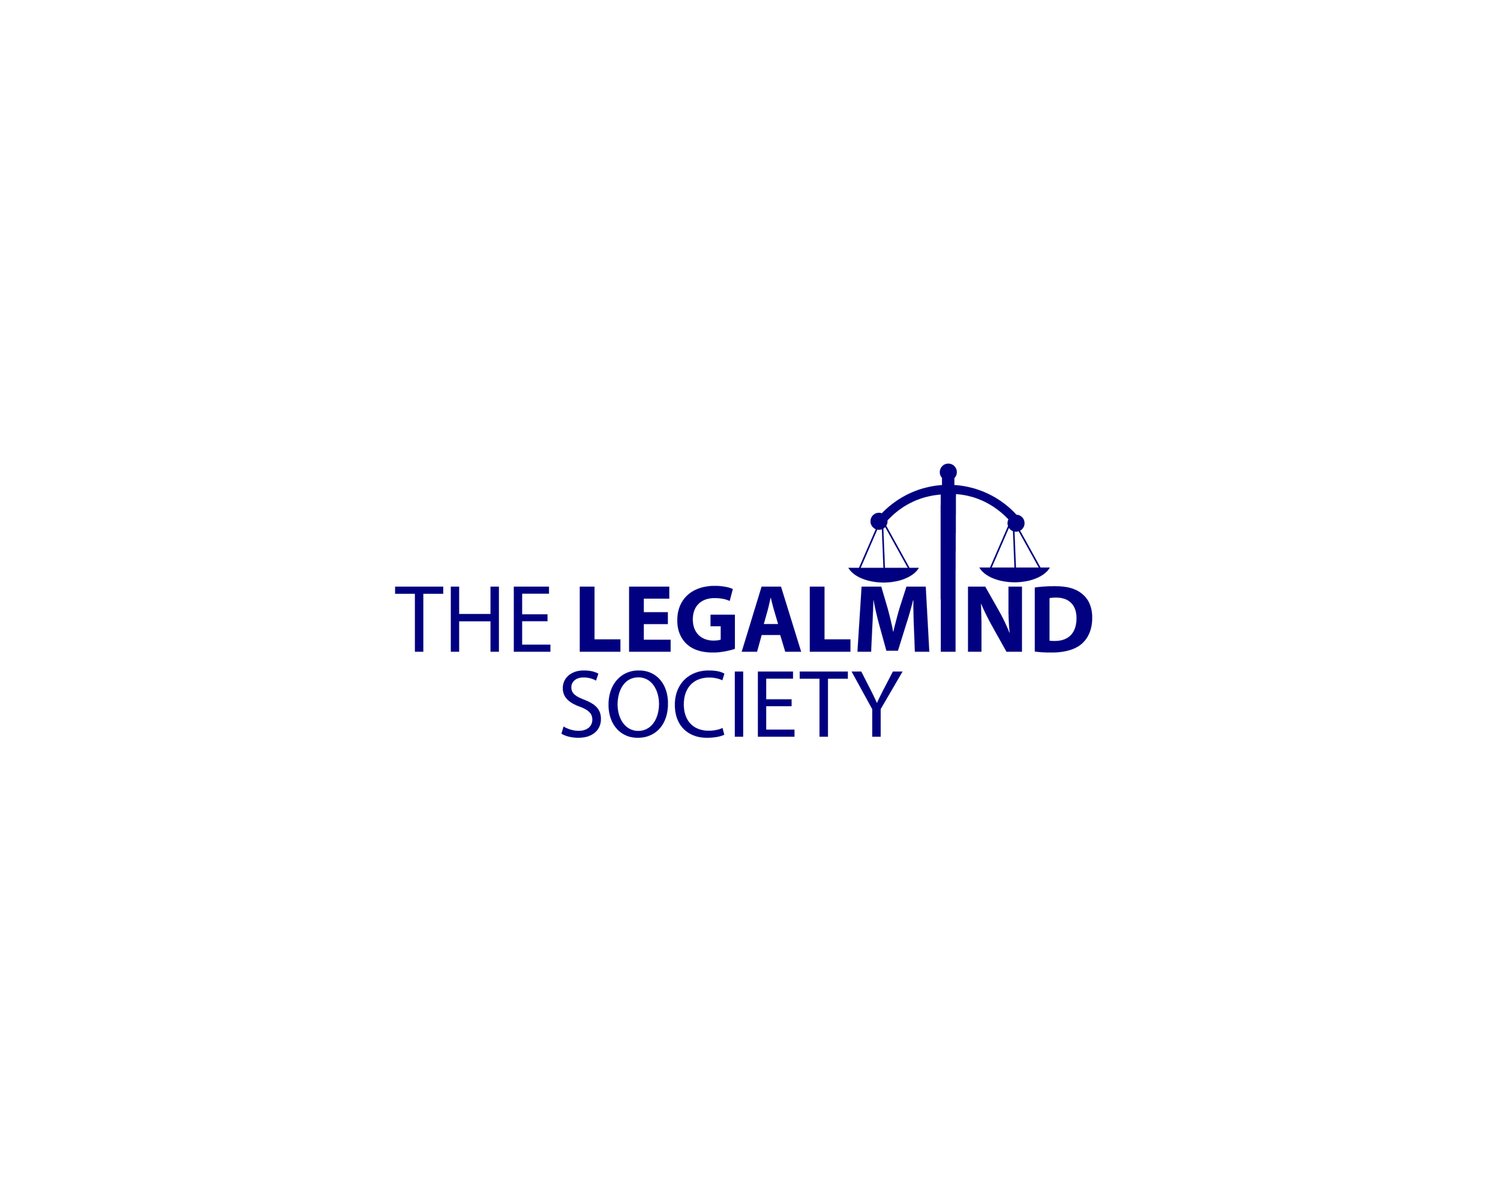 The LegalMind Society